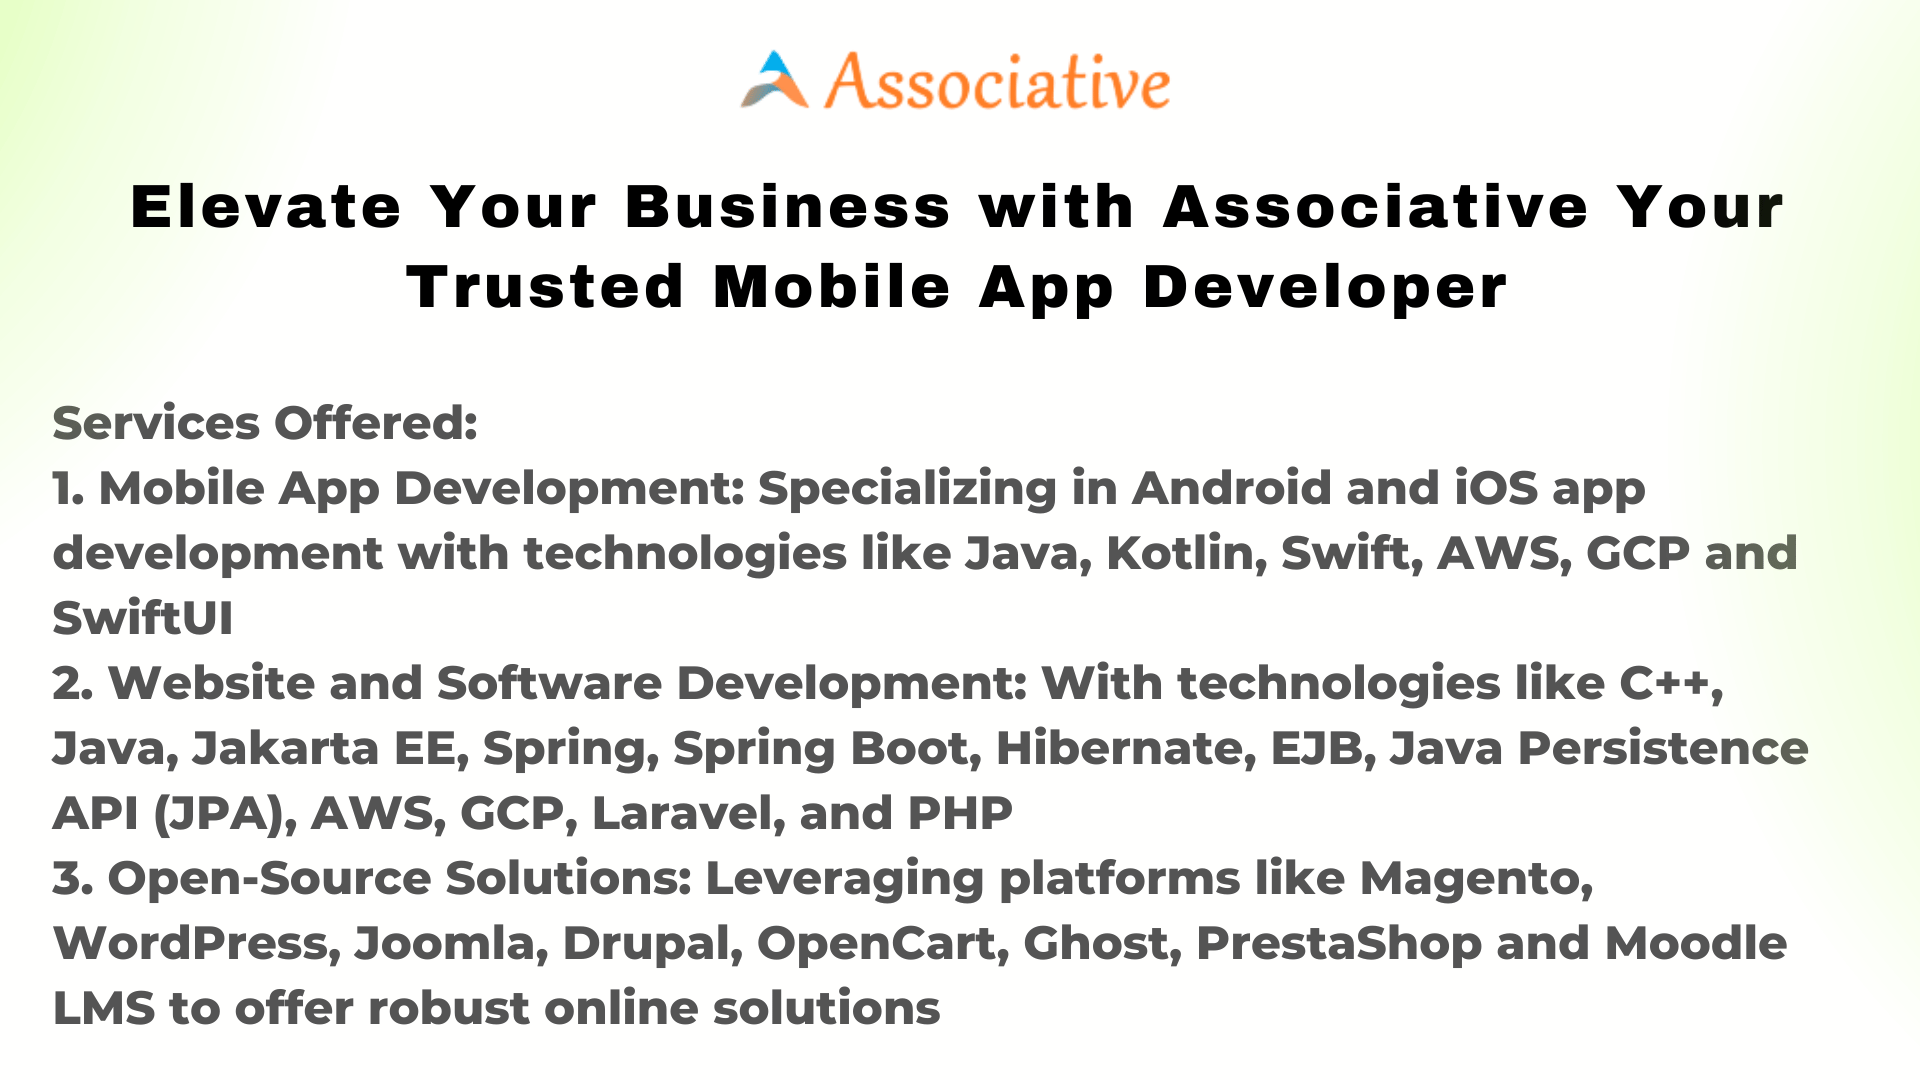 Elevate Your Business with Associative Your Trusted Mobile App Developer